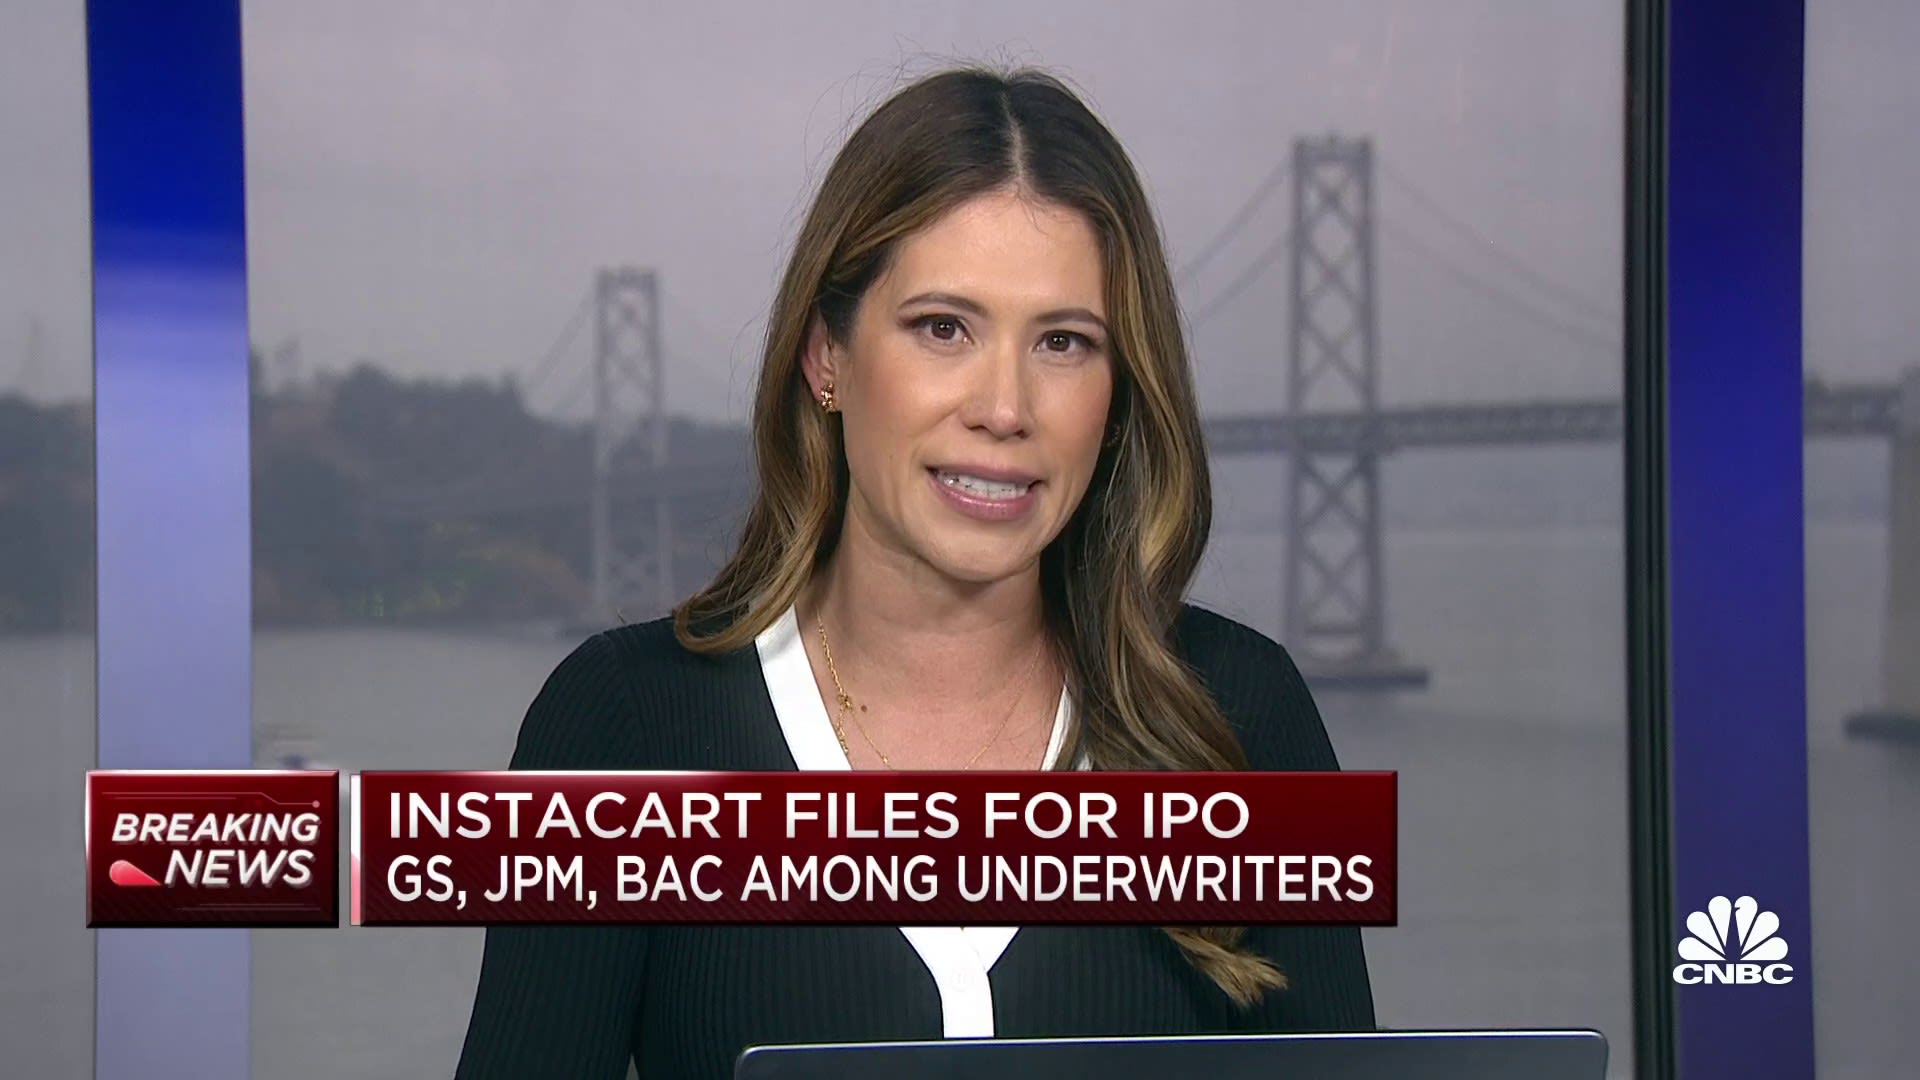 Instacart's IPO filing sparked an online spat between cloud rivals Snowflake and Databricks